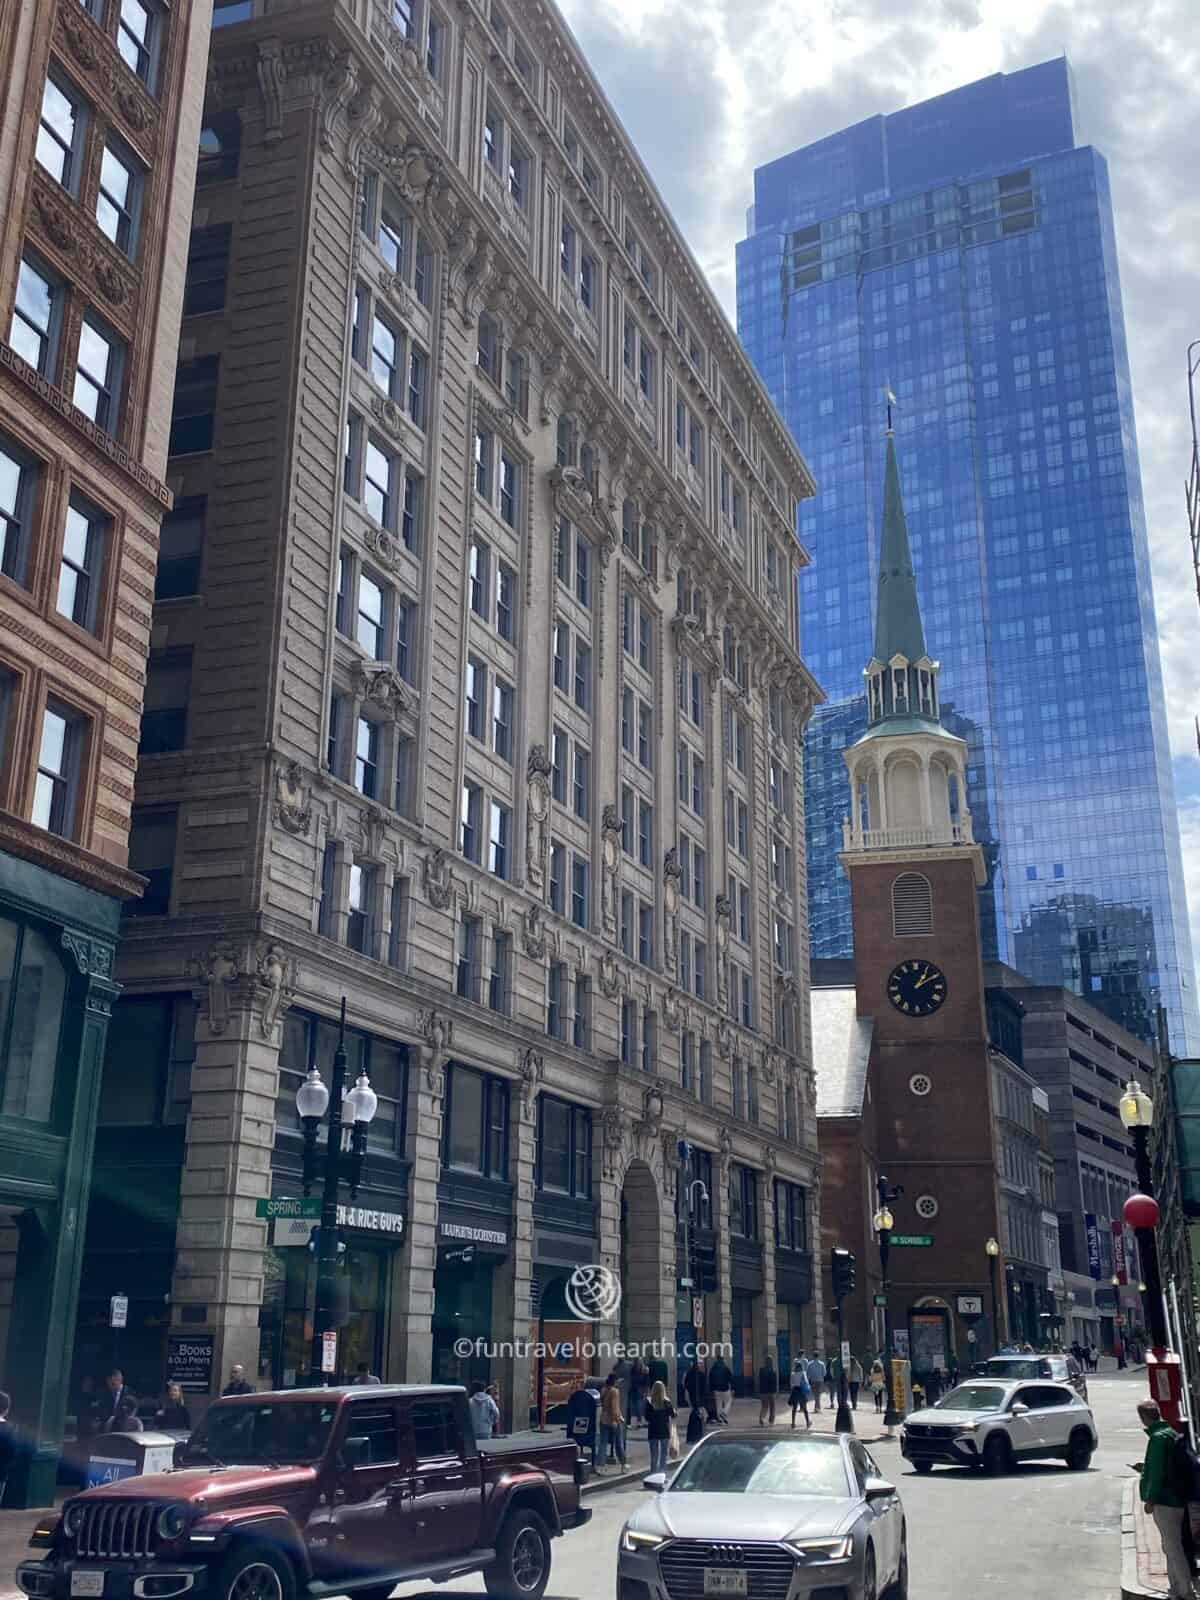 Old South Meeting House, Boston, U.S.